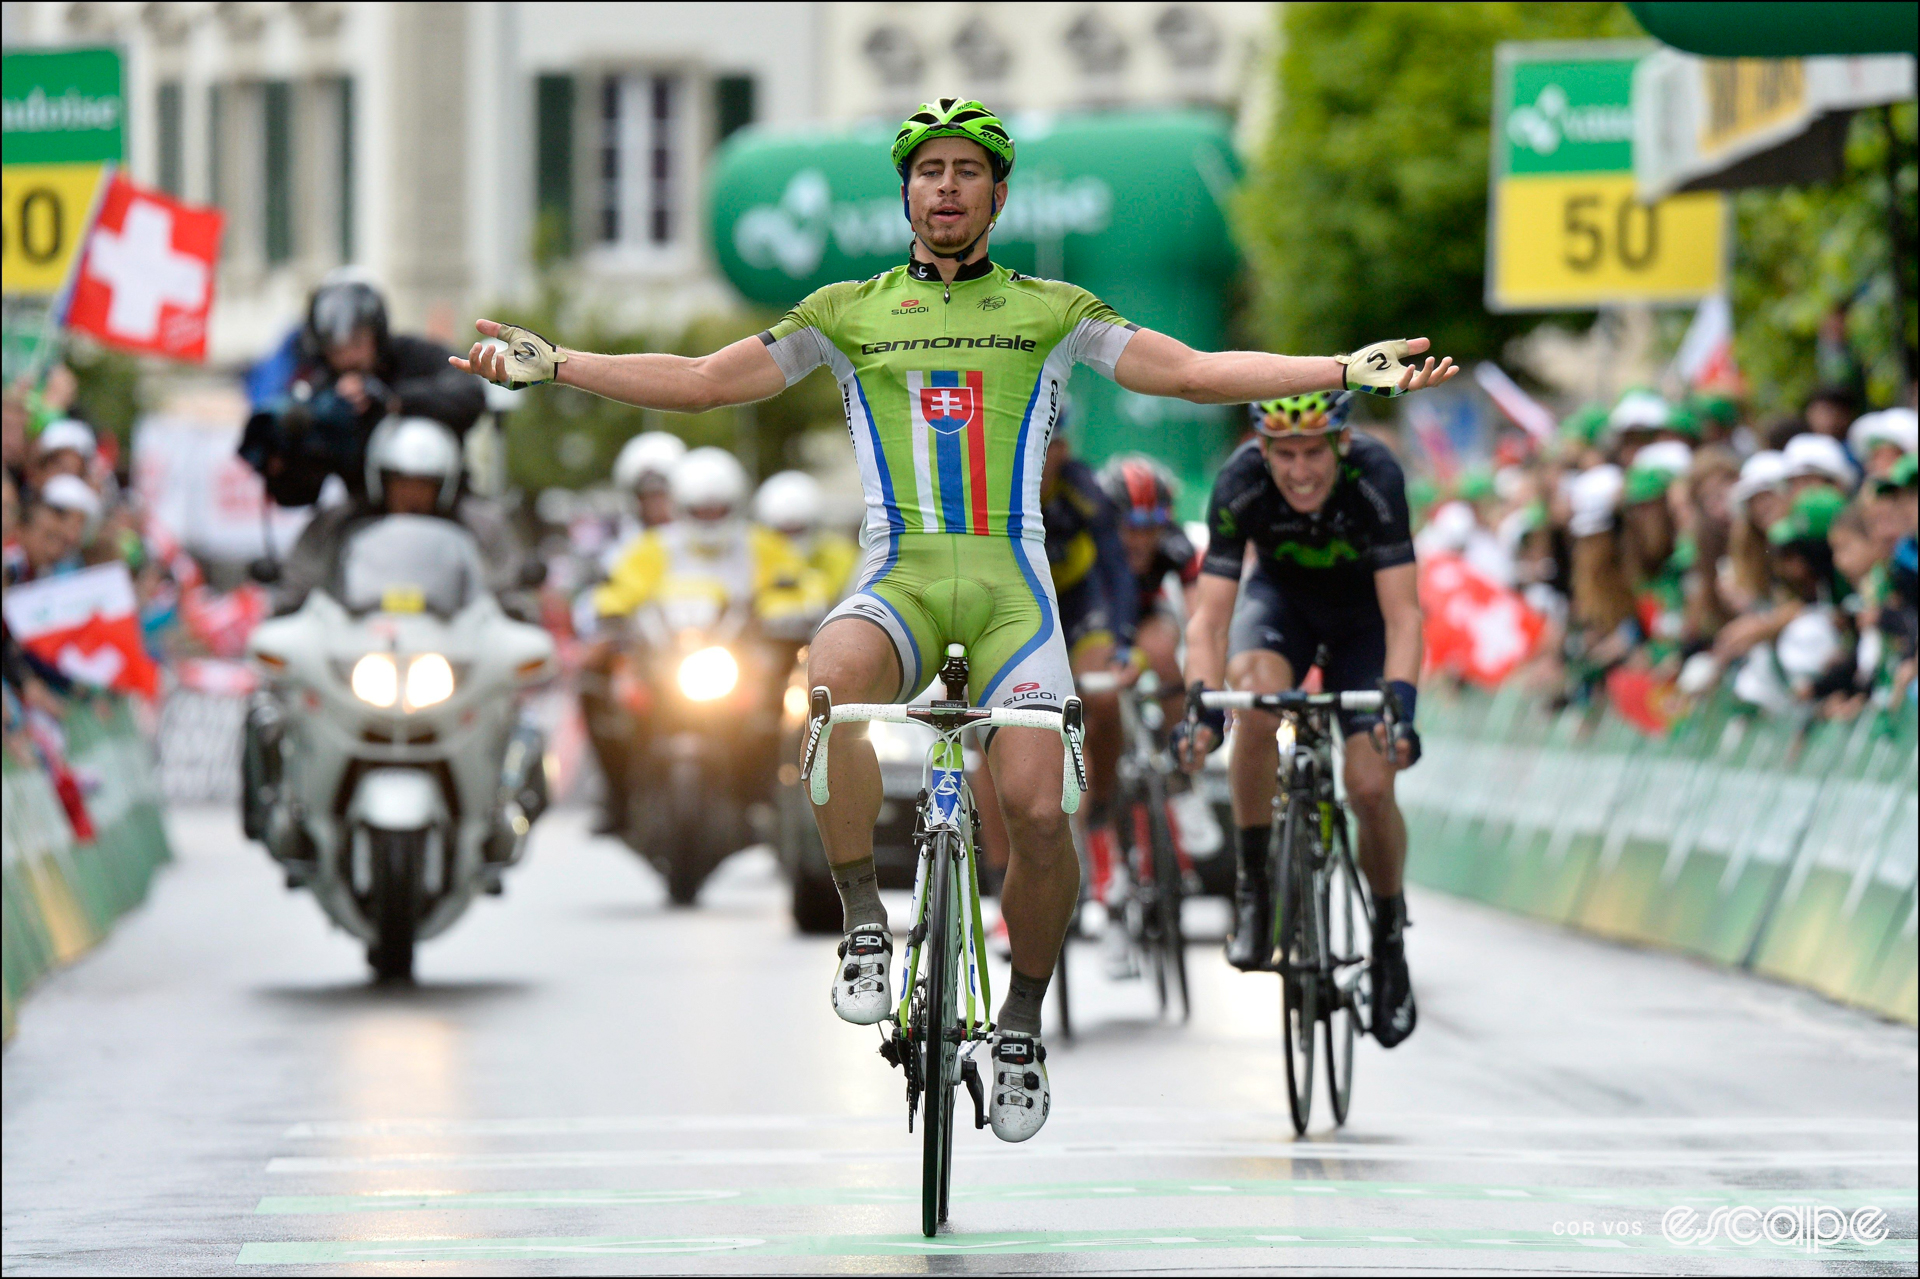 Peter Sagan celebrates winning a stage at the 2013 Tour de Suisse, with both arms horizontal out to his sides.